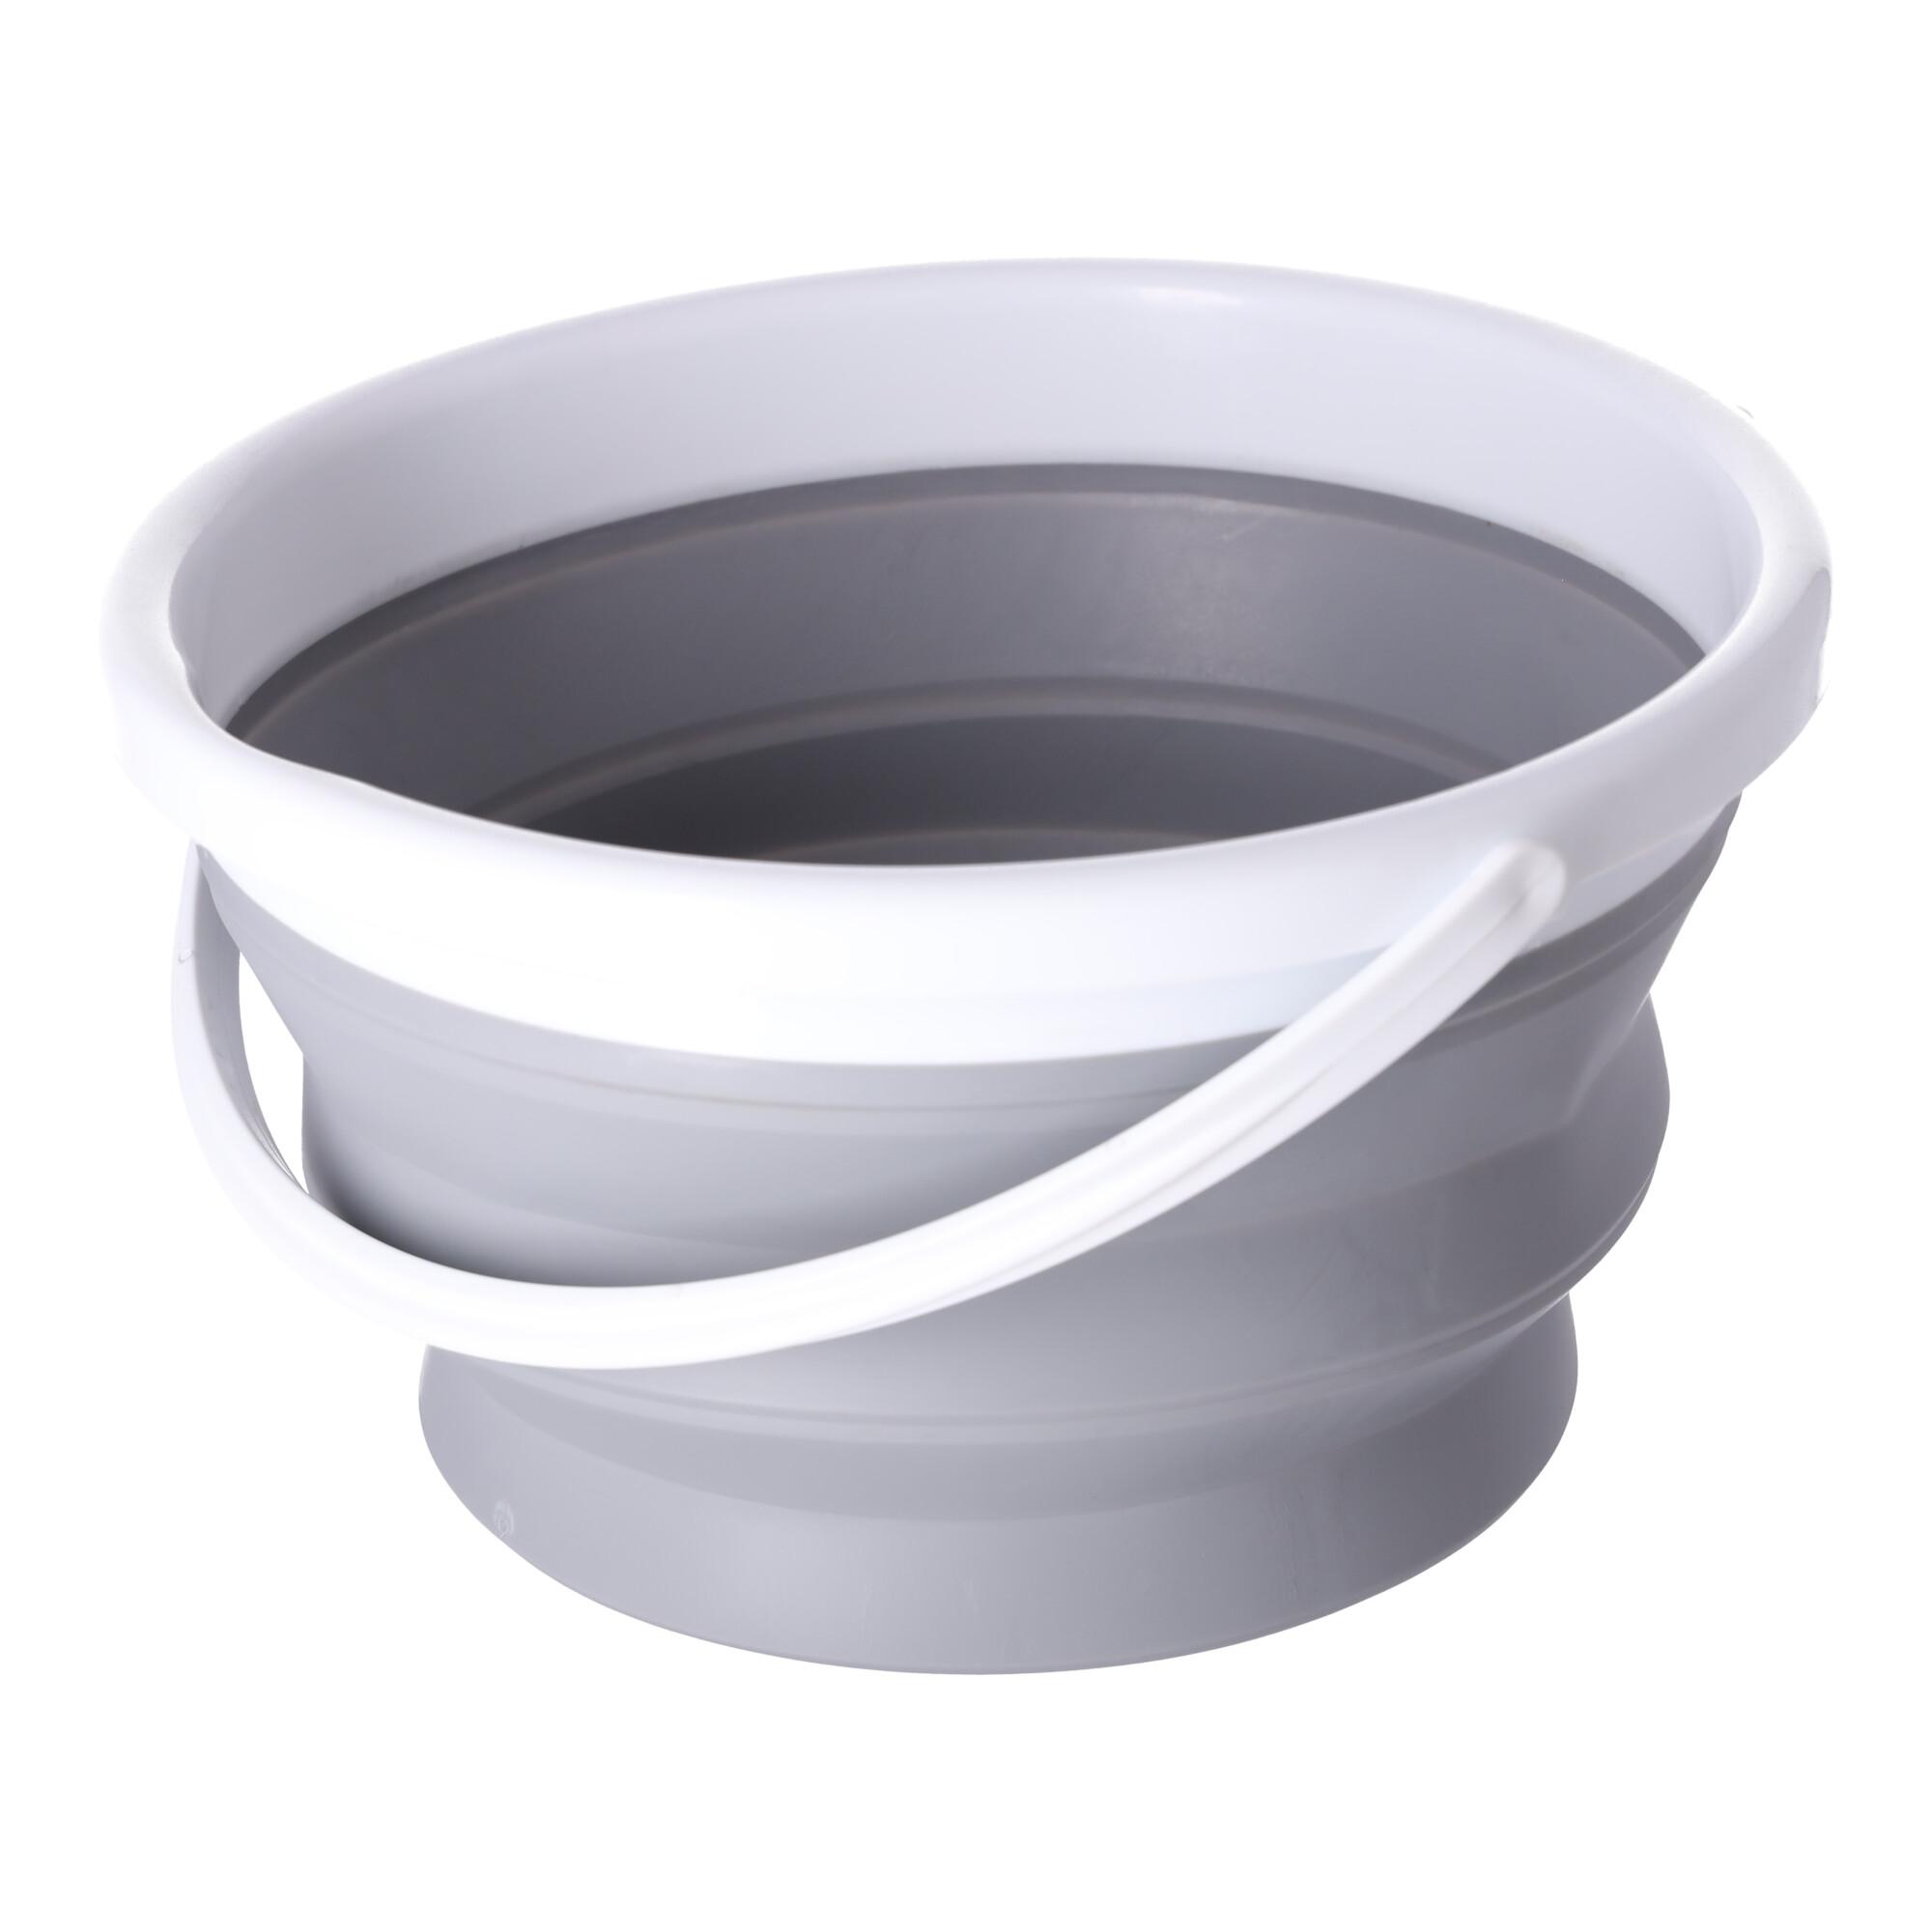 Silicone bucket 10L foldable - grey and white